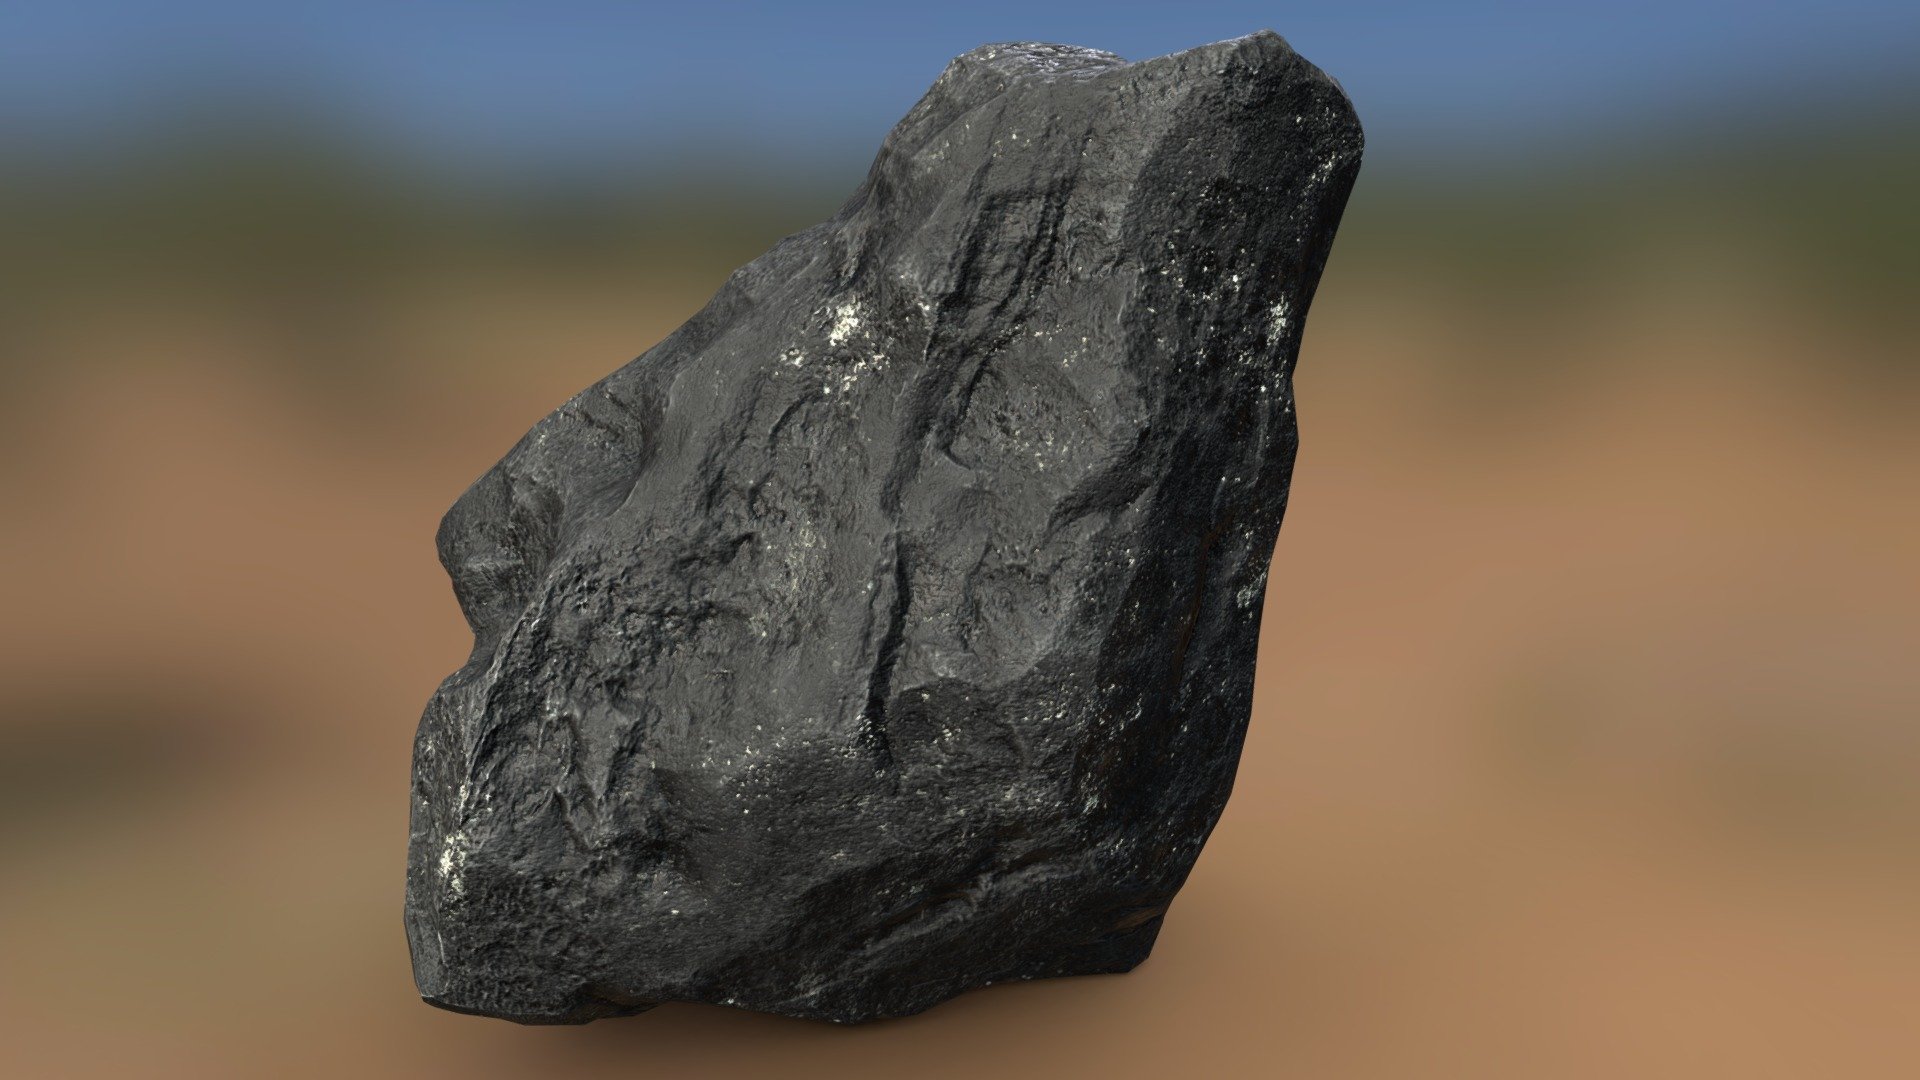 Here is a realtime coastal rock. Partially wet / moisture in crevices. This is meant to be used in coastal scenes where sea is near. Can be also in volcanic scenes as this type of blackish rock is often near volcanoes.

Available in Turbosquid:
-link removed-

Originally sculpted in ZBrush and then retopologized and textured using Substance Designer 3d model